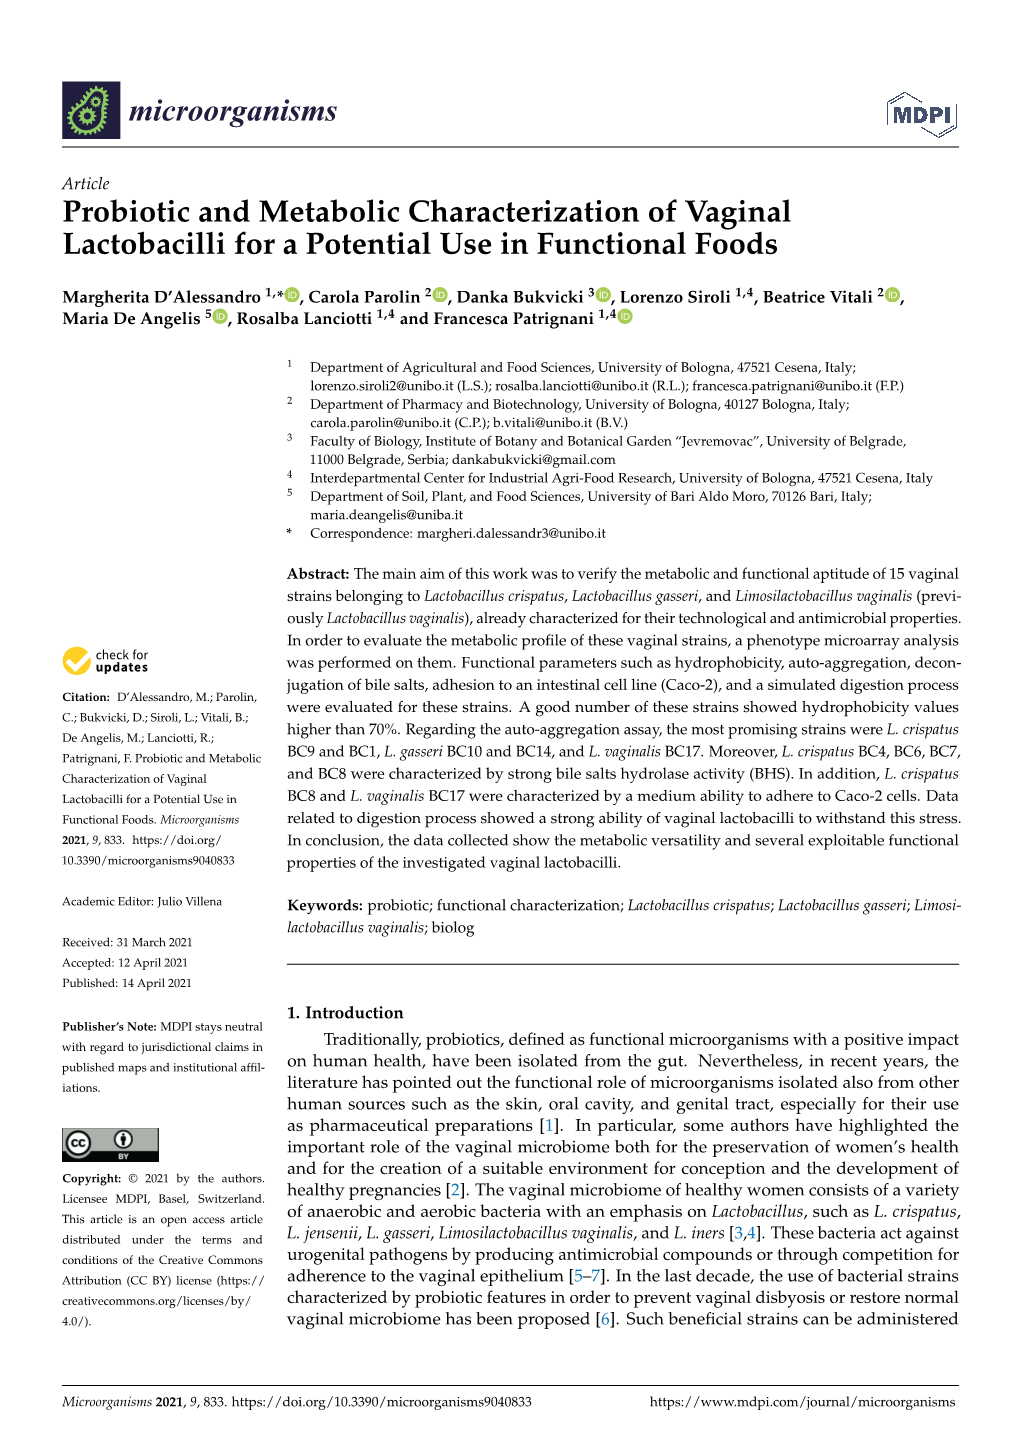 Probiotic and Metabolic Characterization of Vaginal Lactobacilli for a Potential Use in Functional Foods